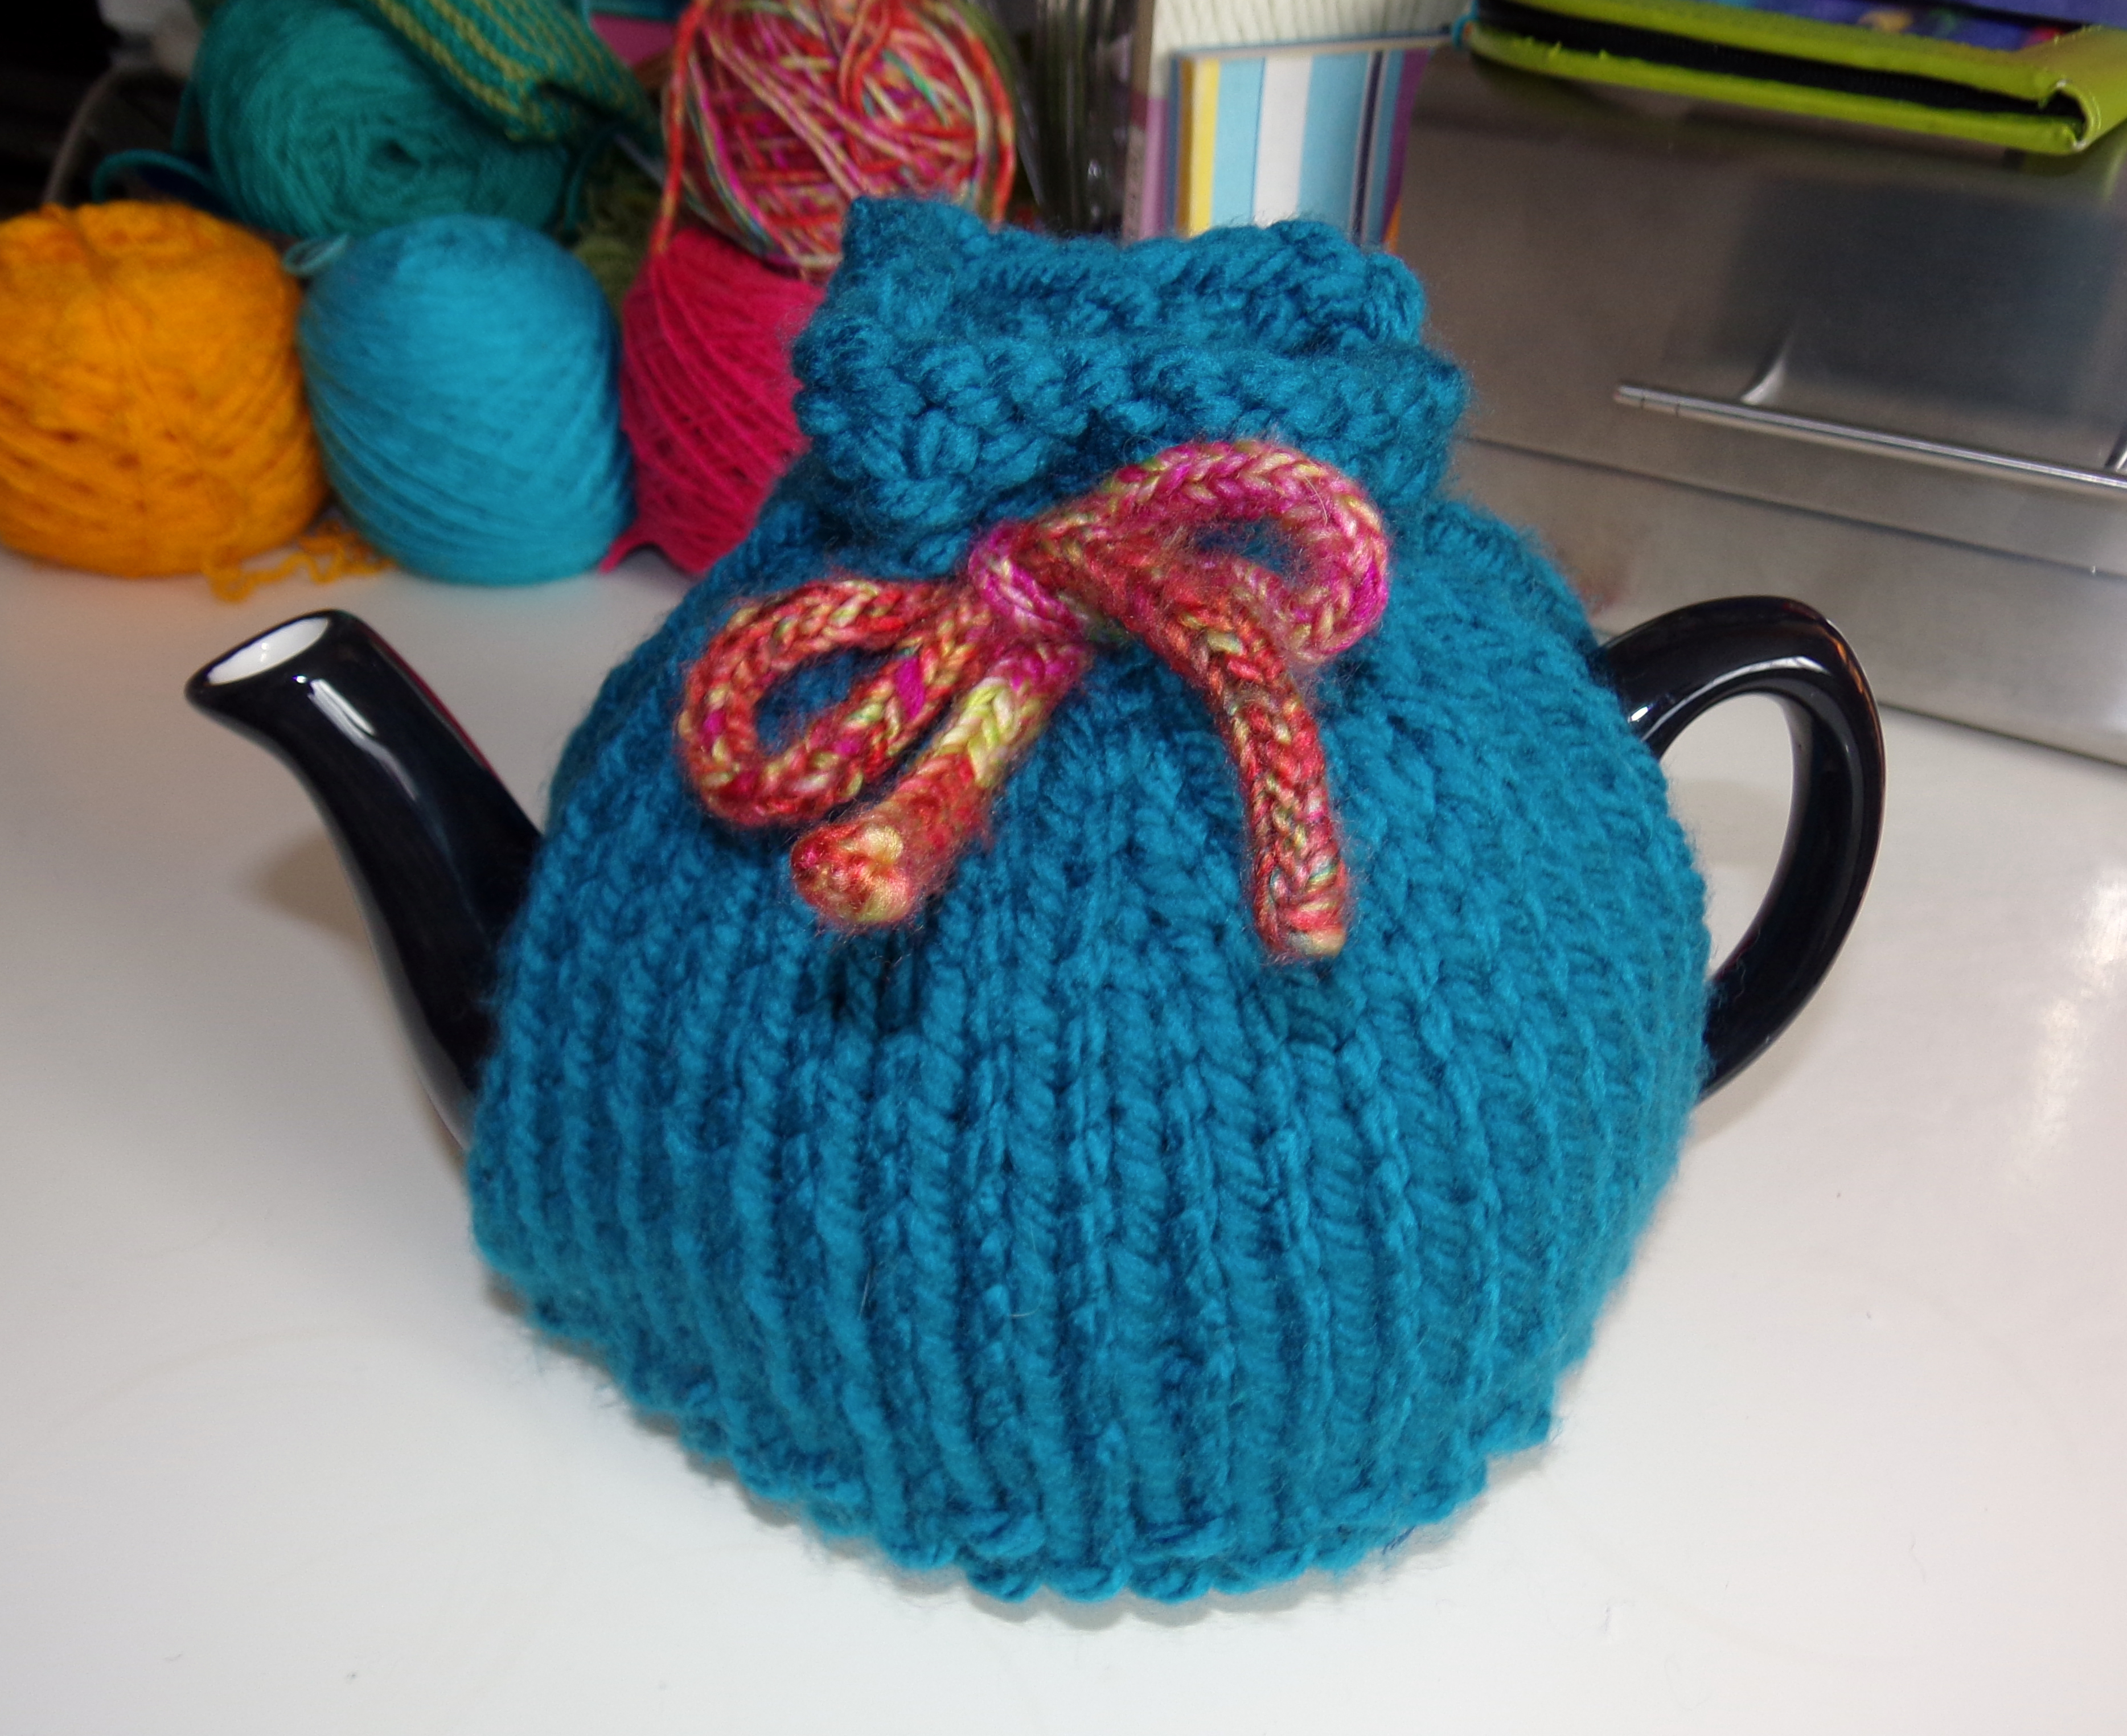 Patterns For Knitted Tea Cosies Three Free Tea Cosy Patterns Reviewed Or Why Tea Pots Are Better